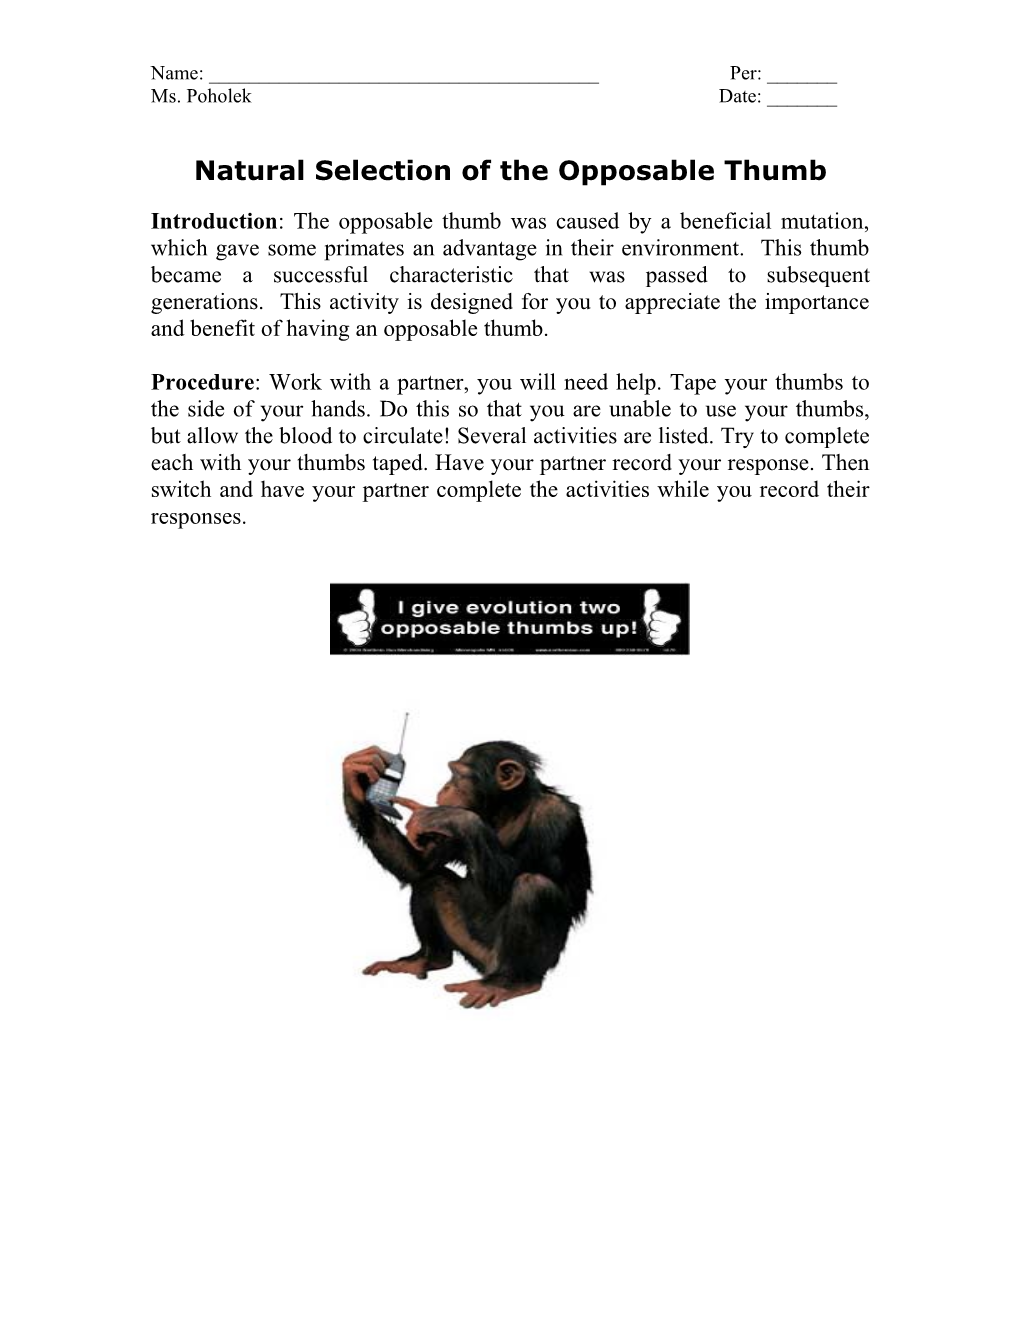 Natural Selection of the Opposable Thumb Laboratory